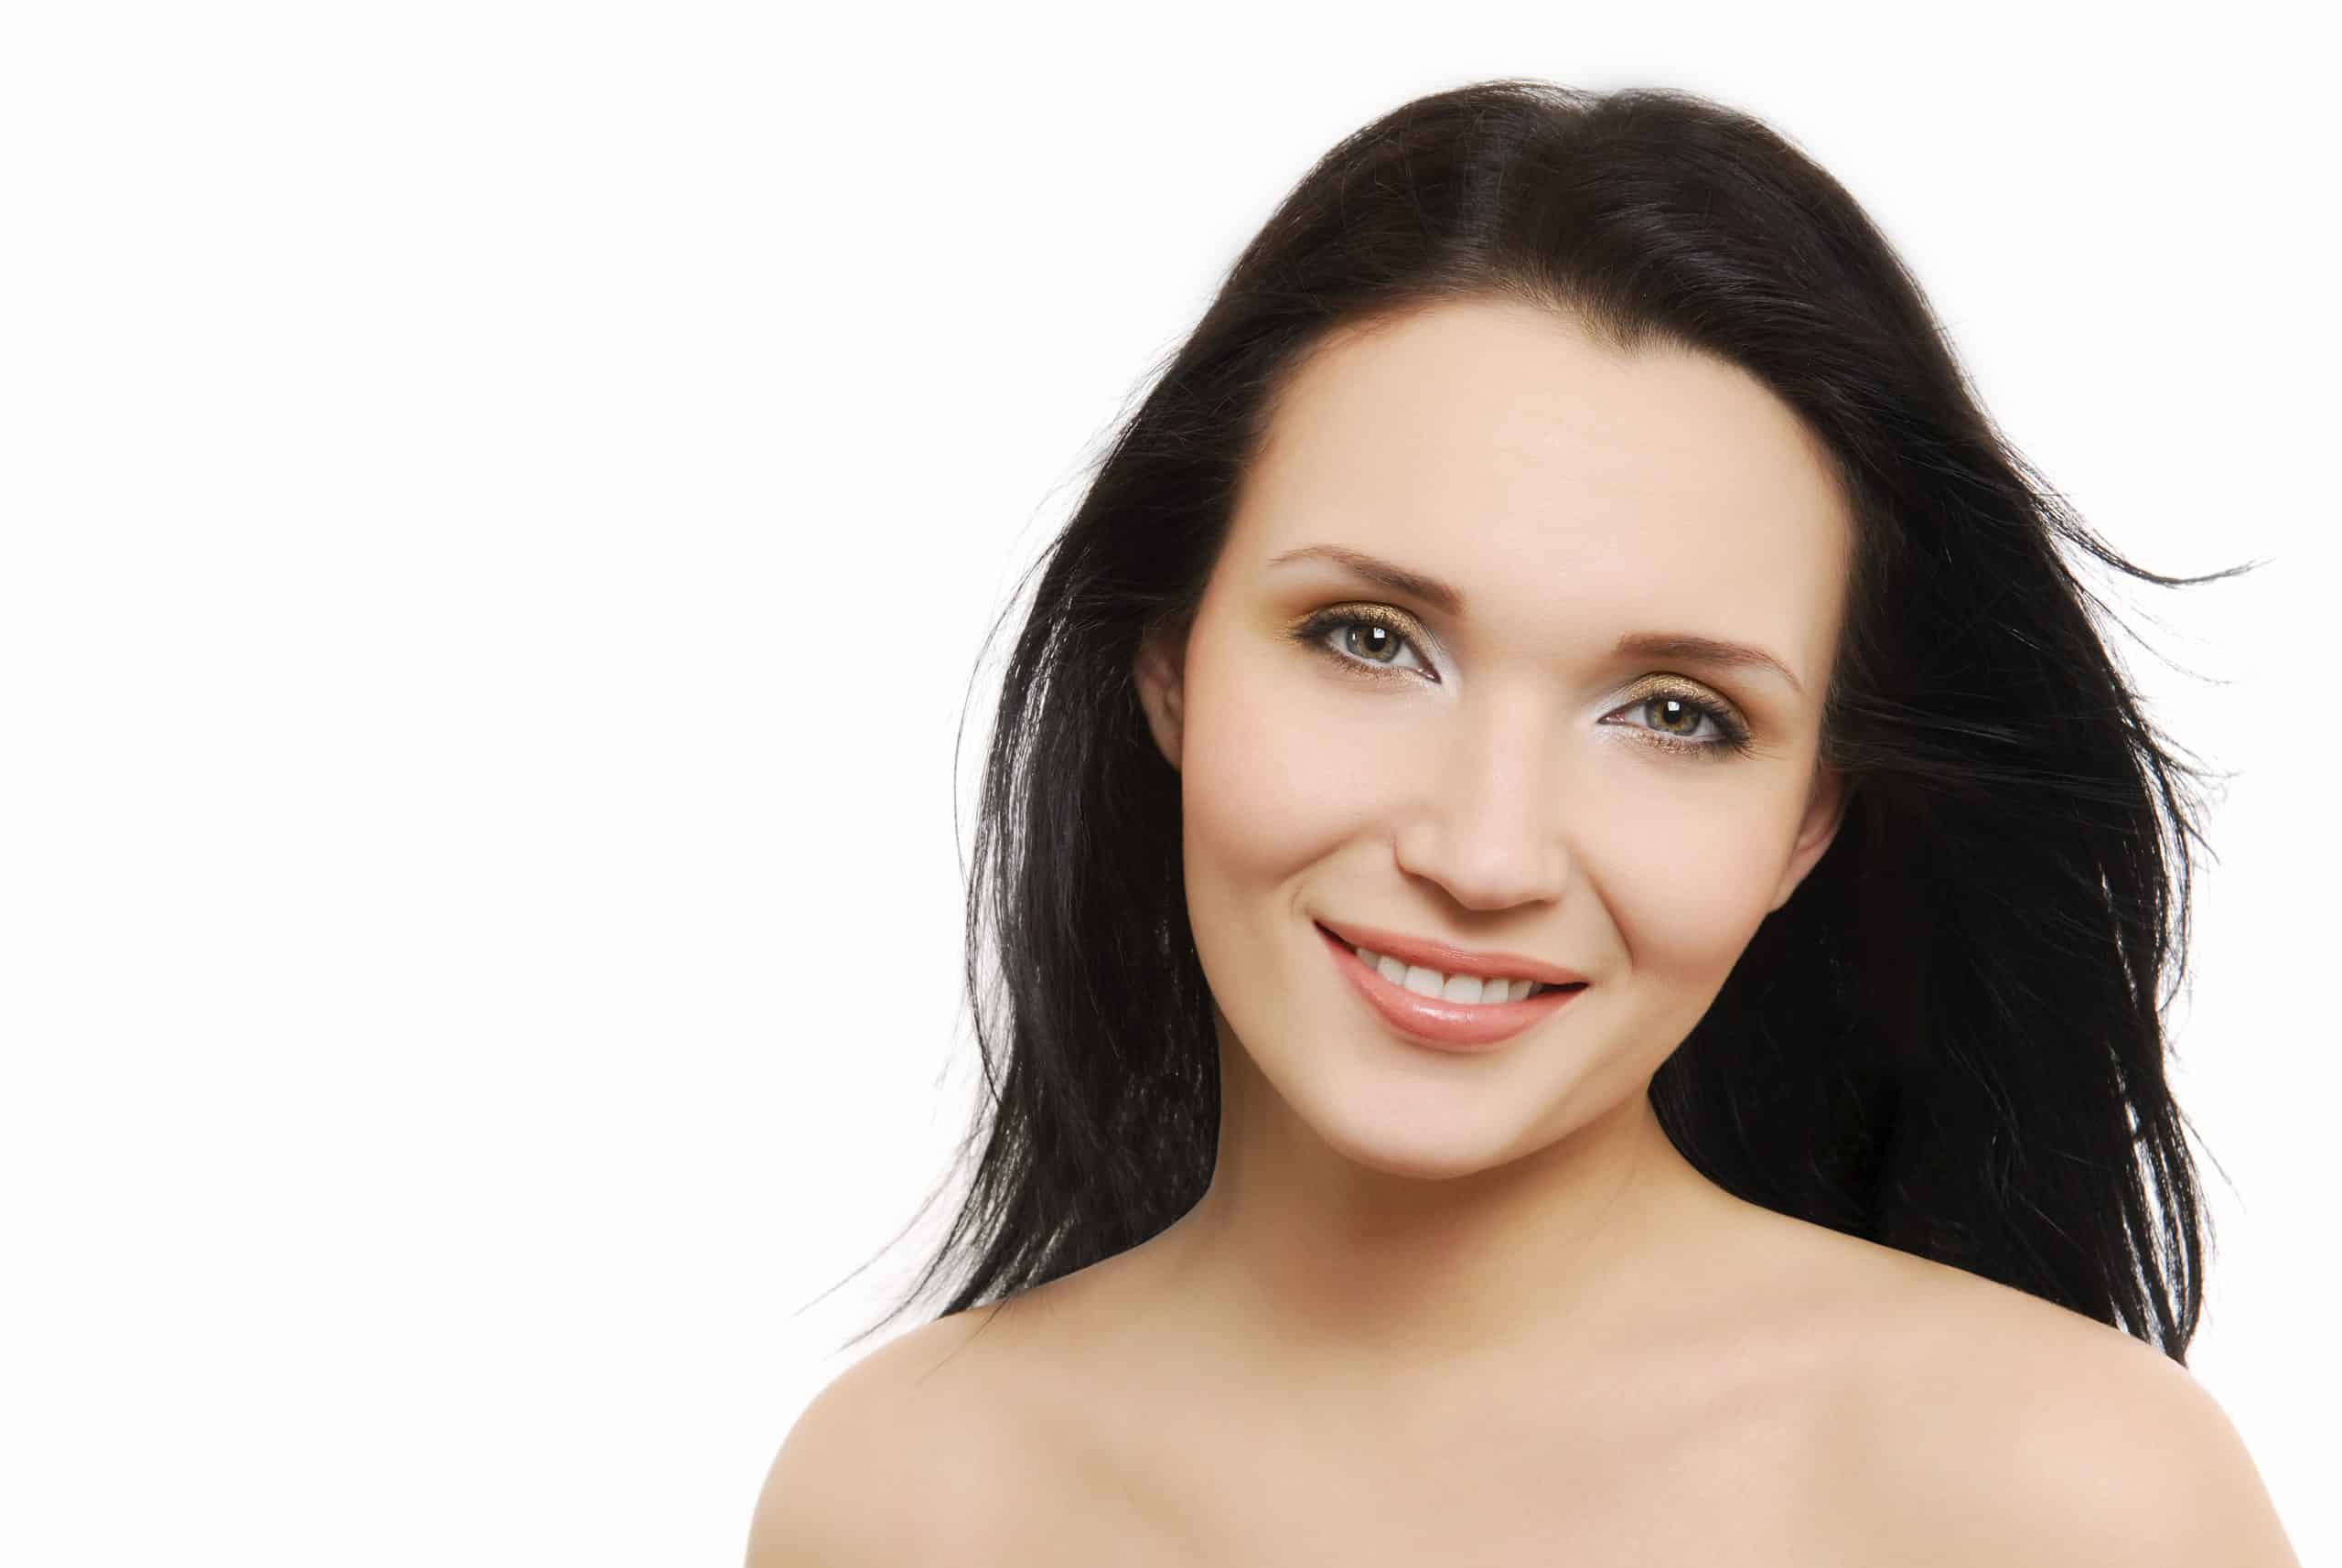 Plastic surgery for brighter eyes